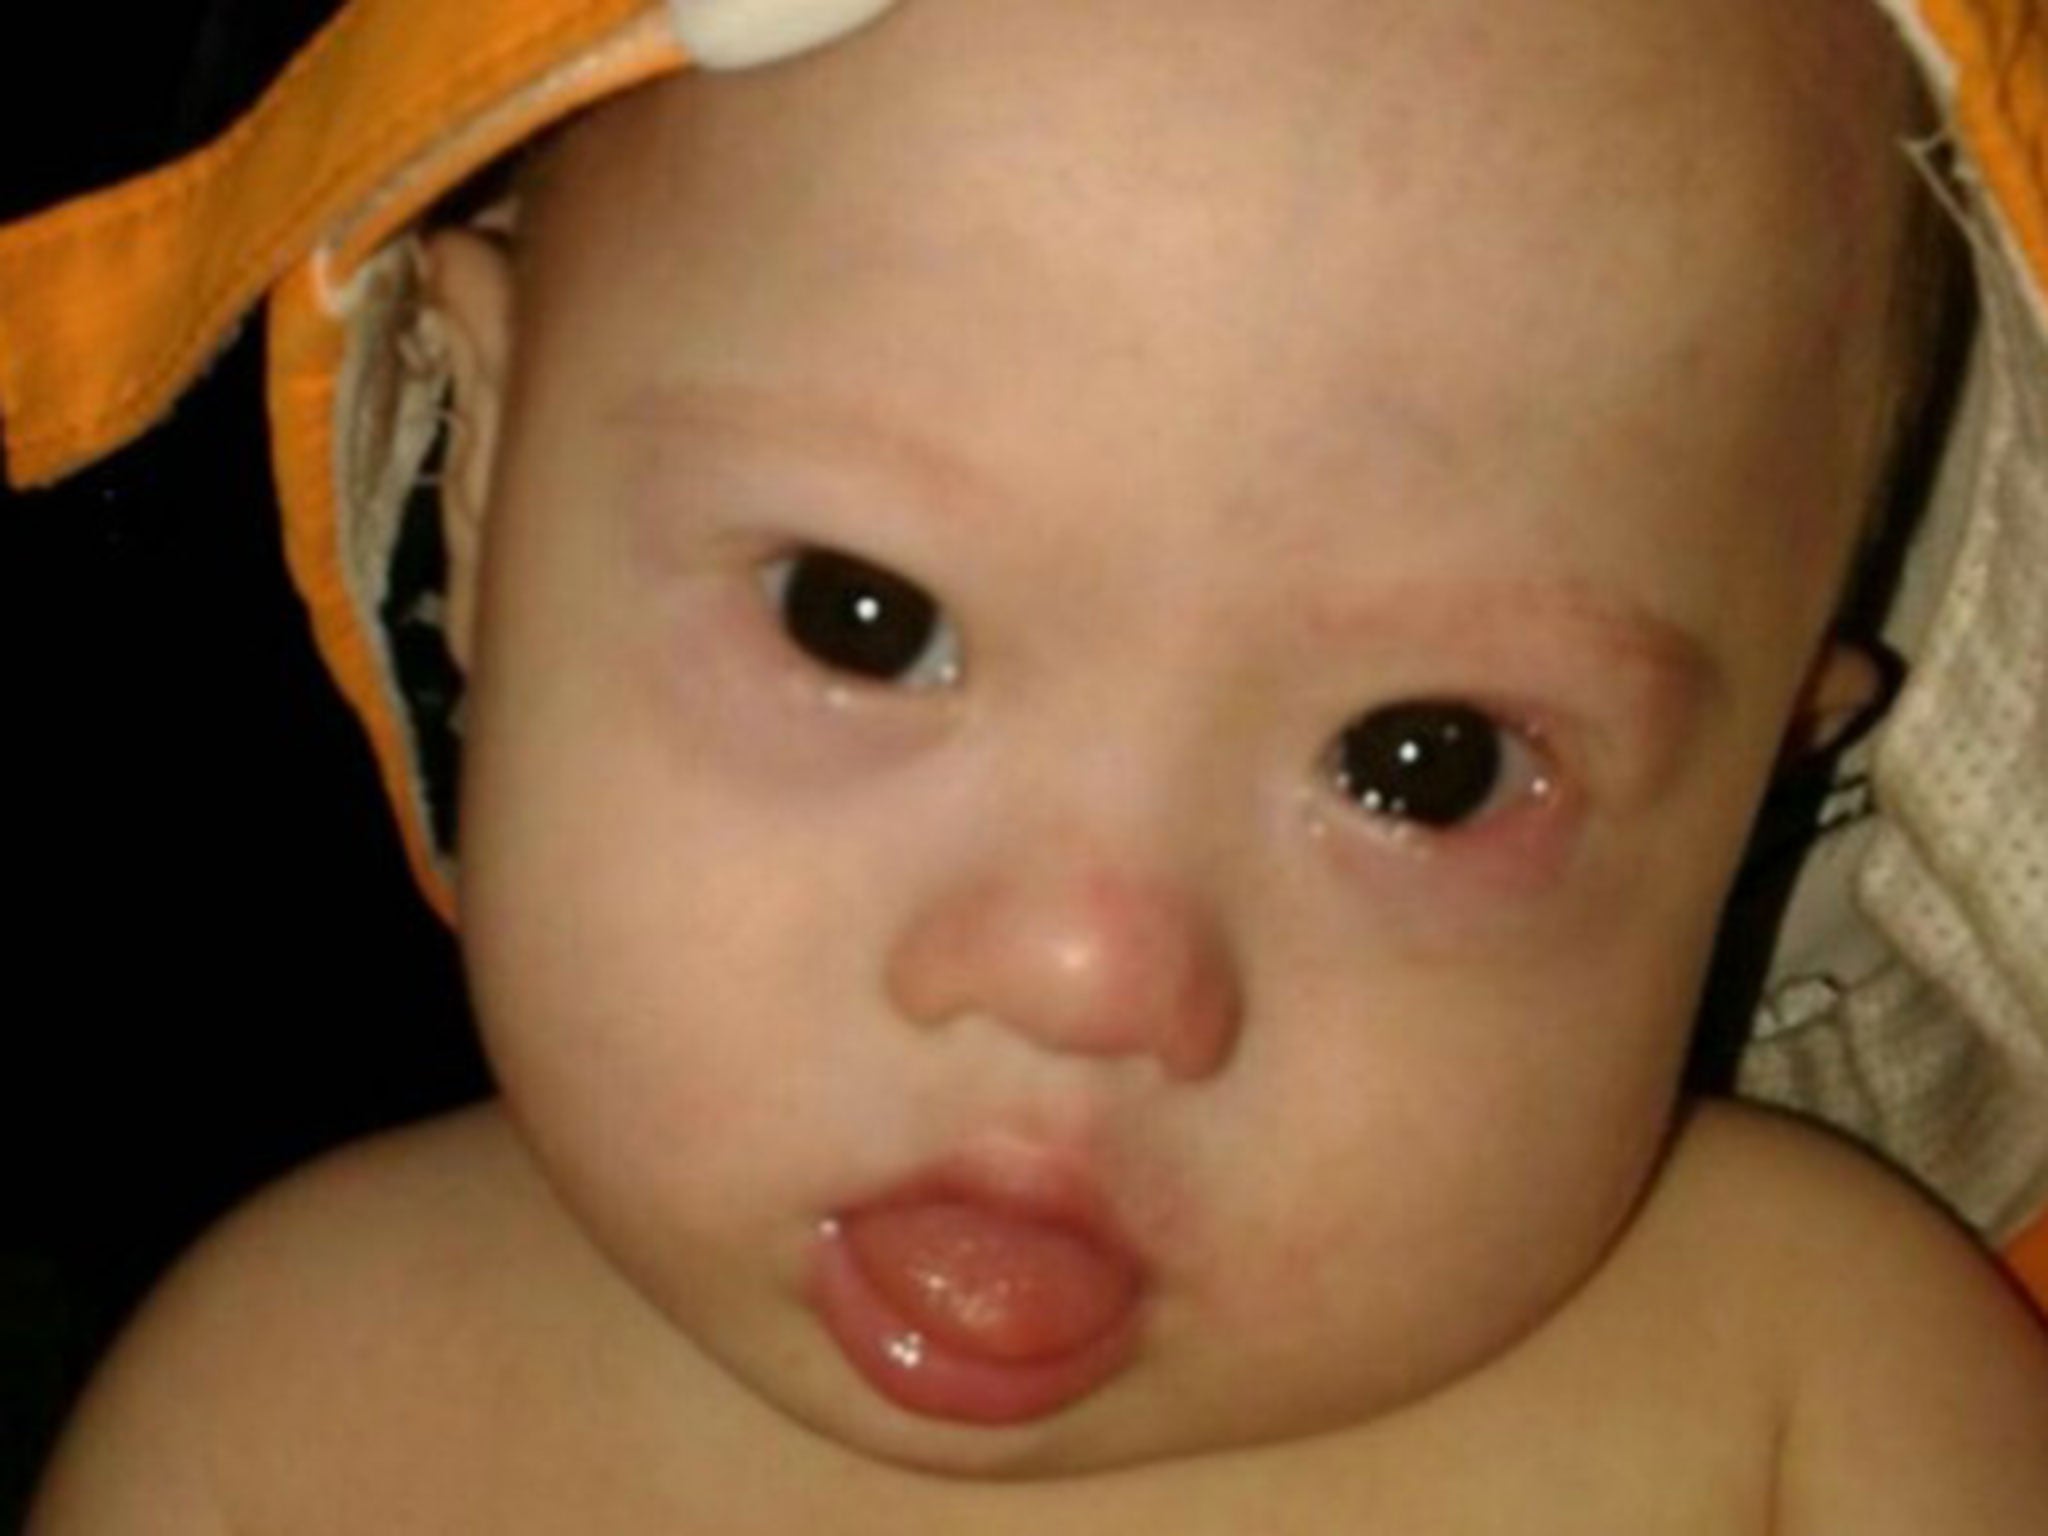 The six-month-old baby known as Gammy who was left with his surrogate 